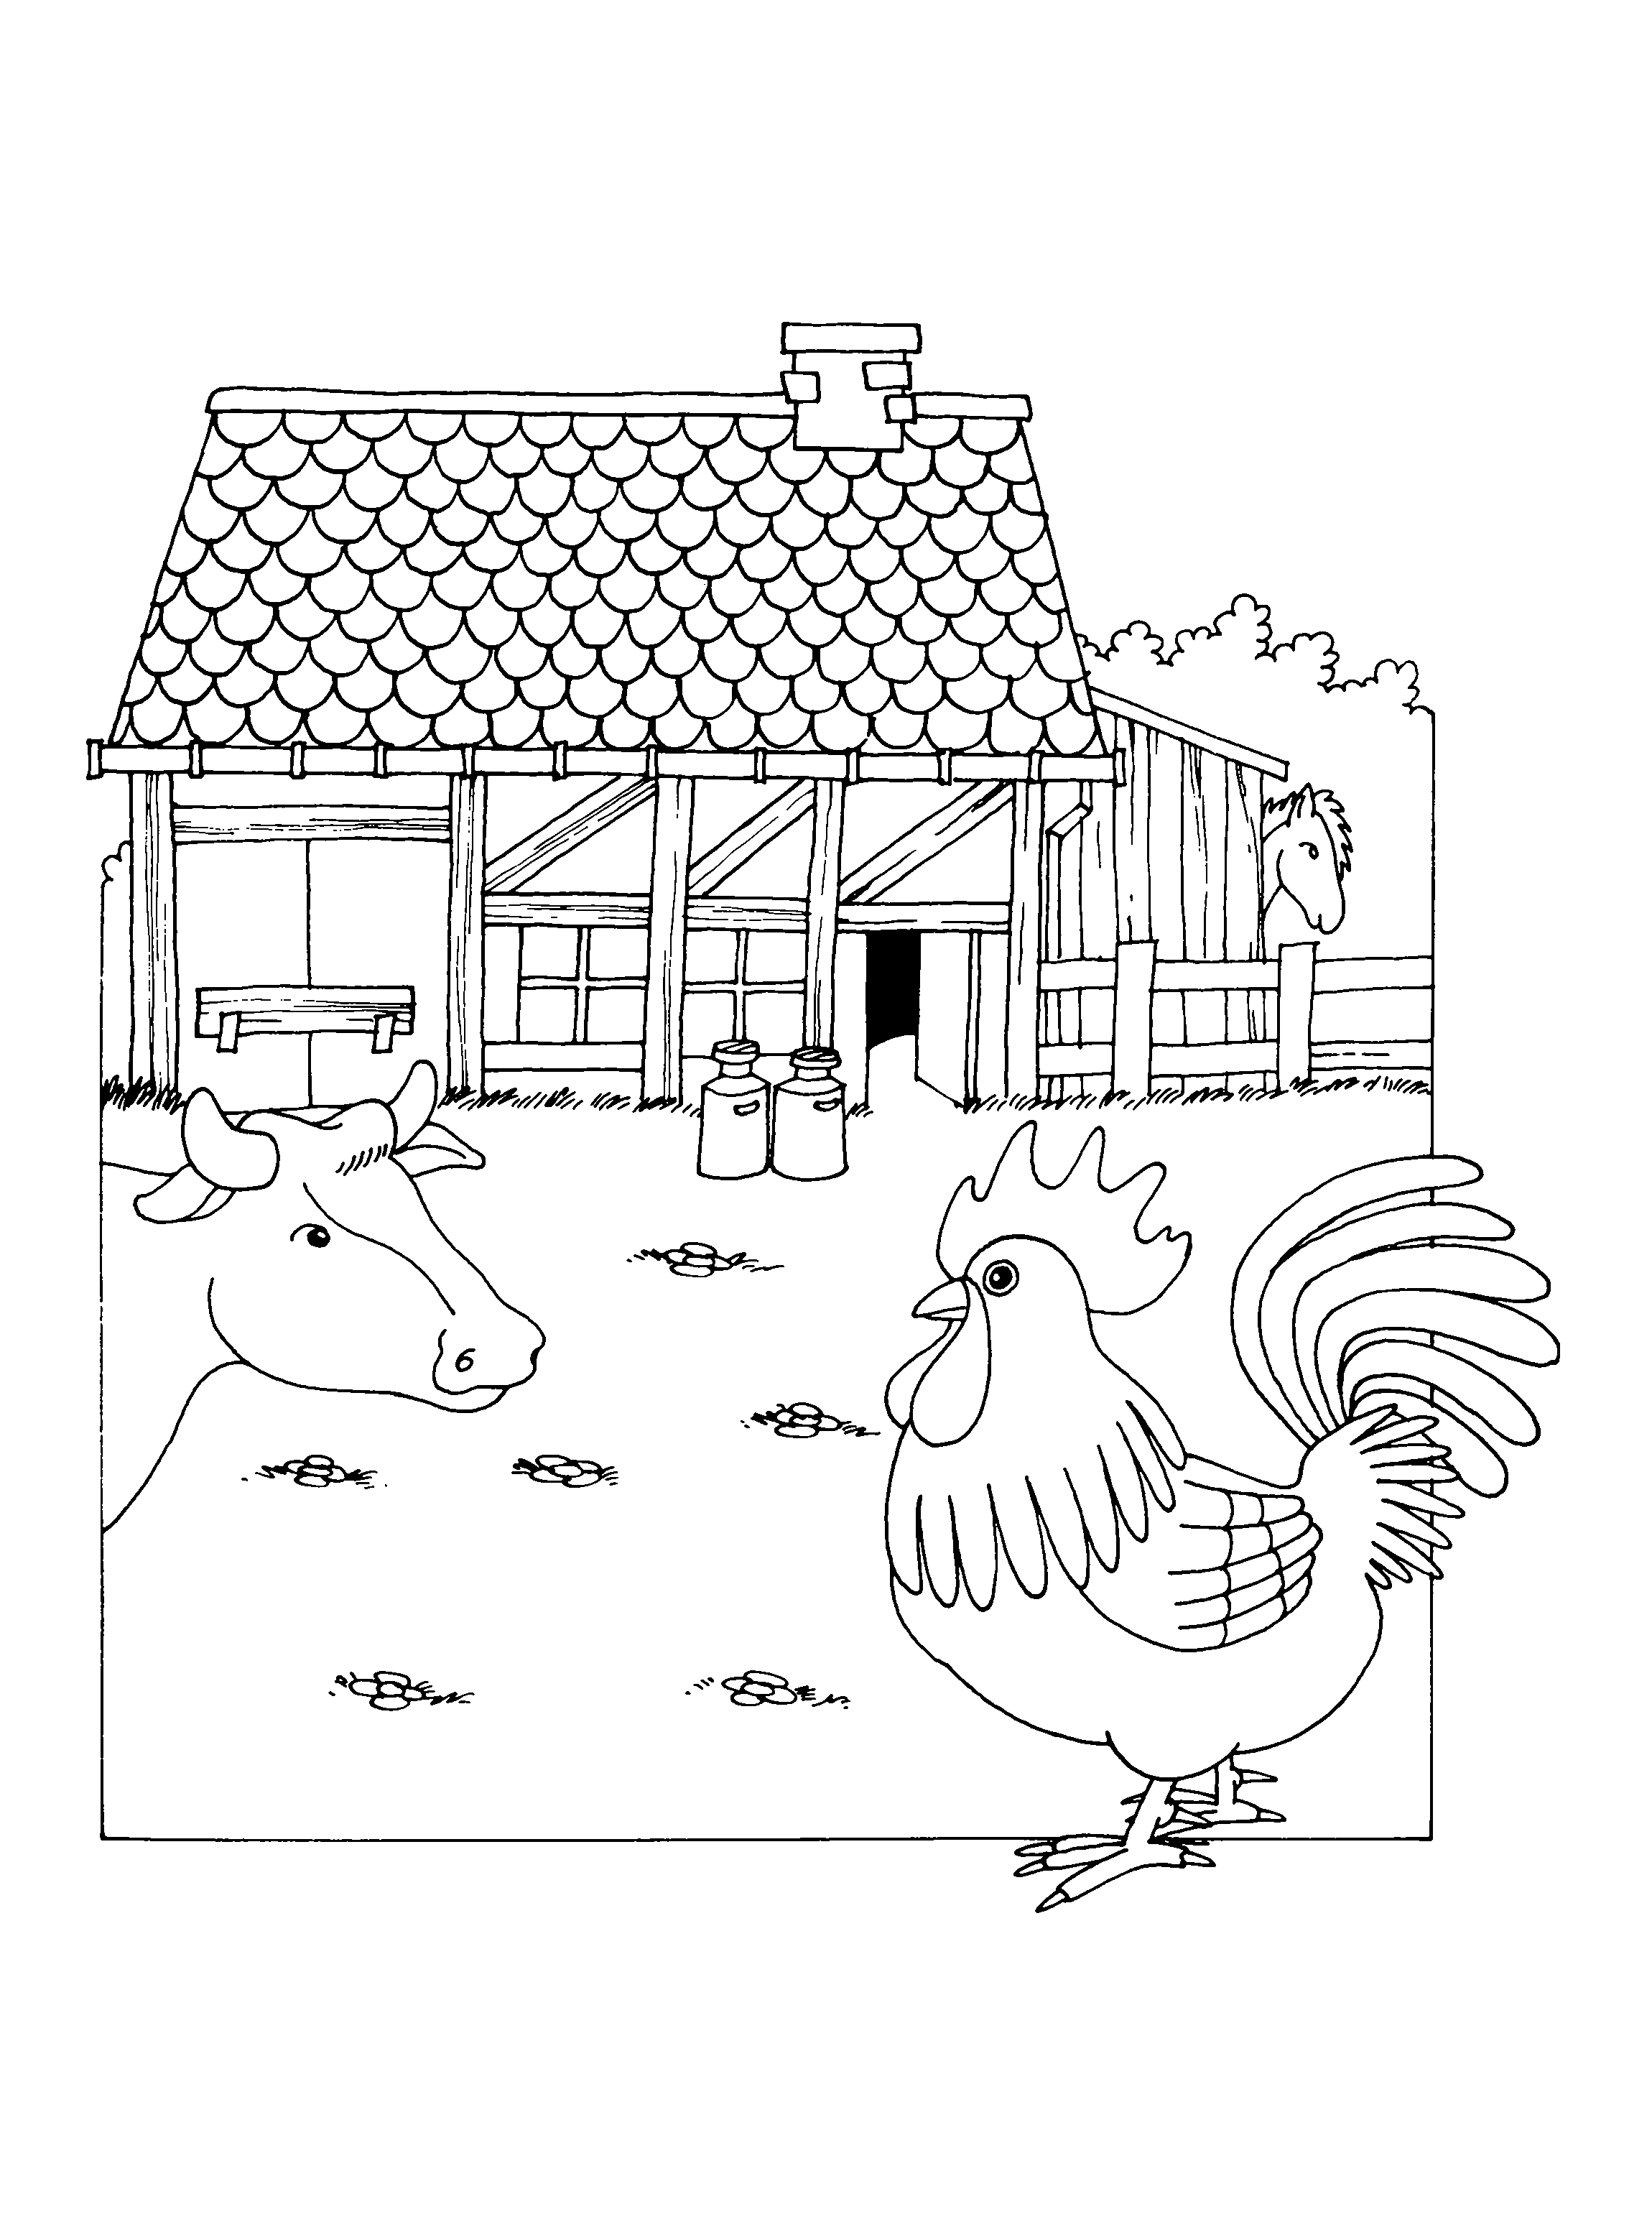 Spike and suzy Coloring Pages - Coloringpages1001.com